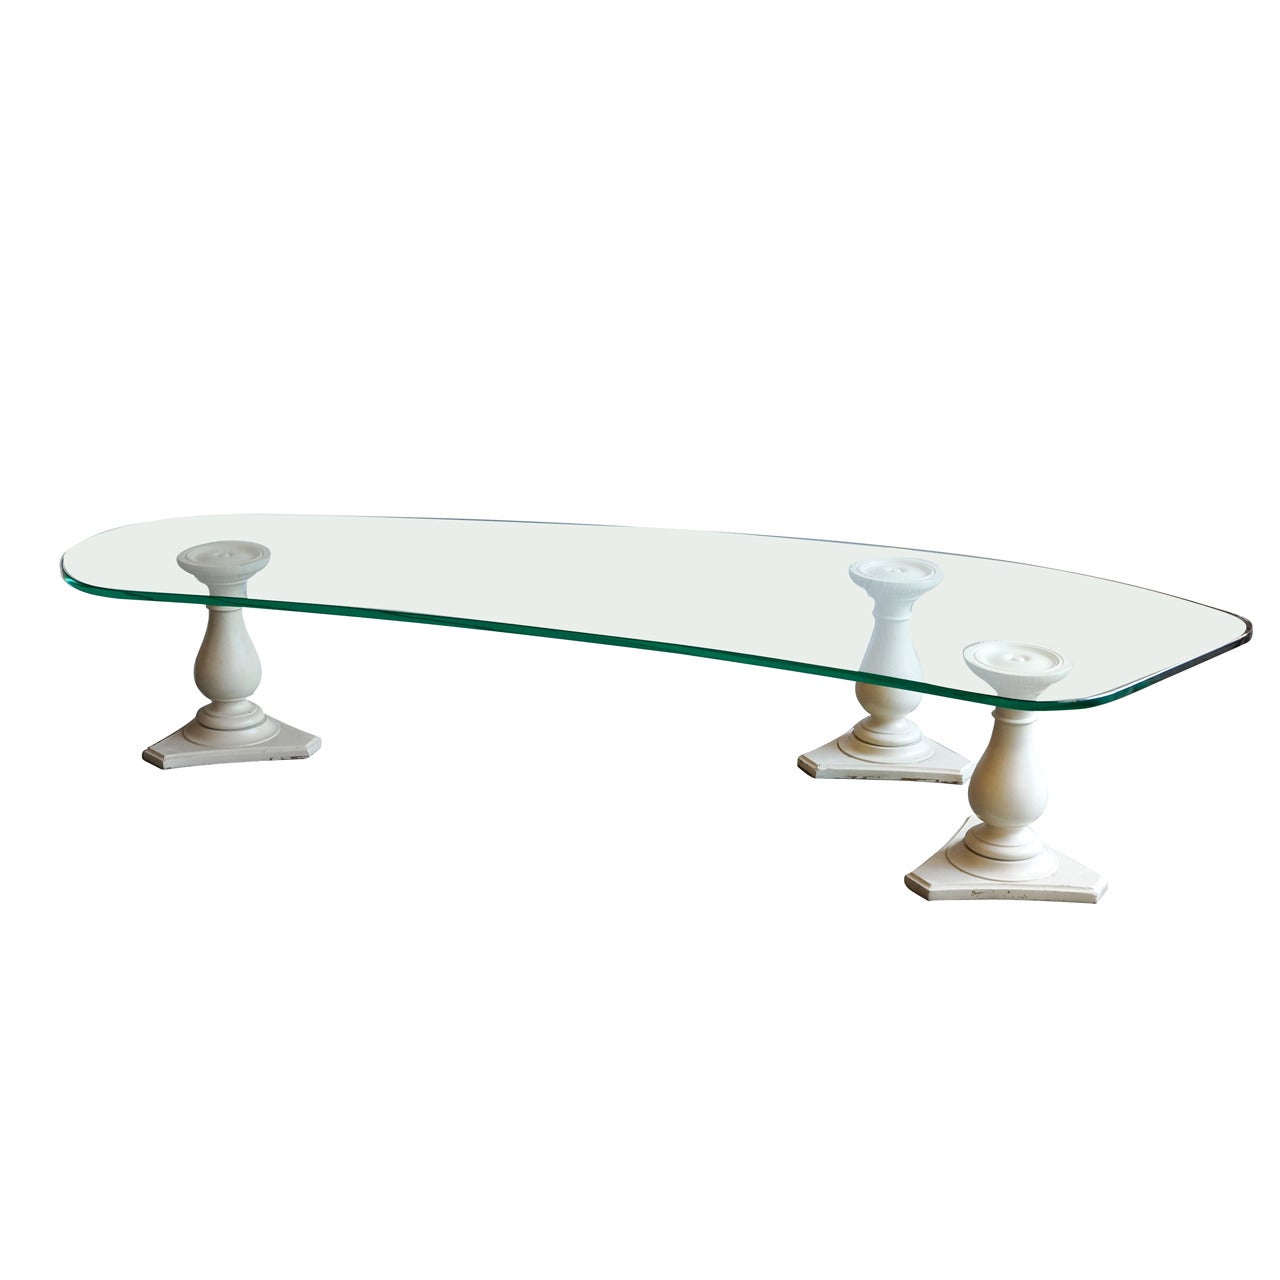 Edith Norton Coffee Table with Kidney-Shaped Glass and Column Bases